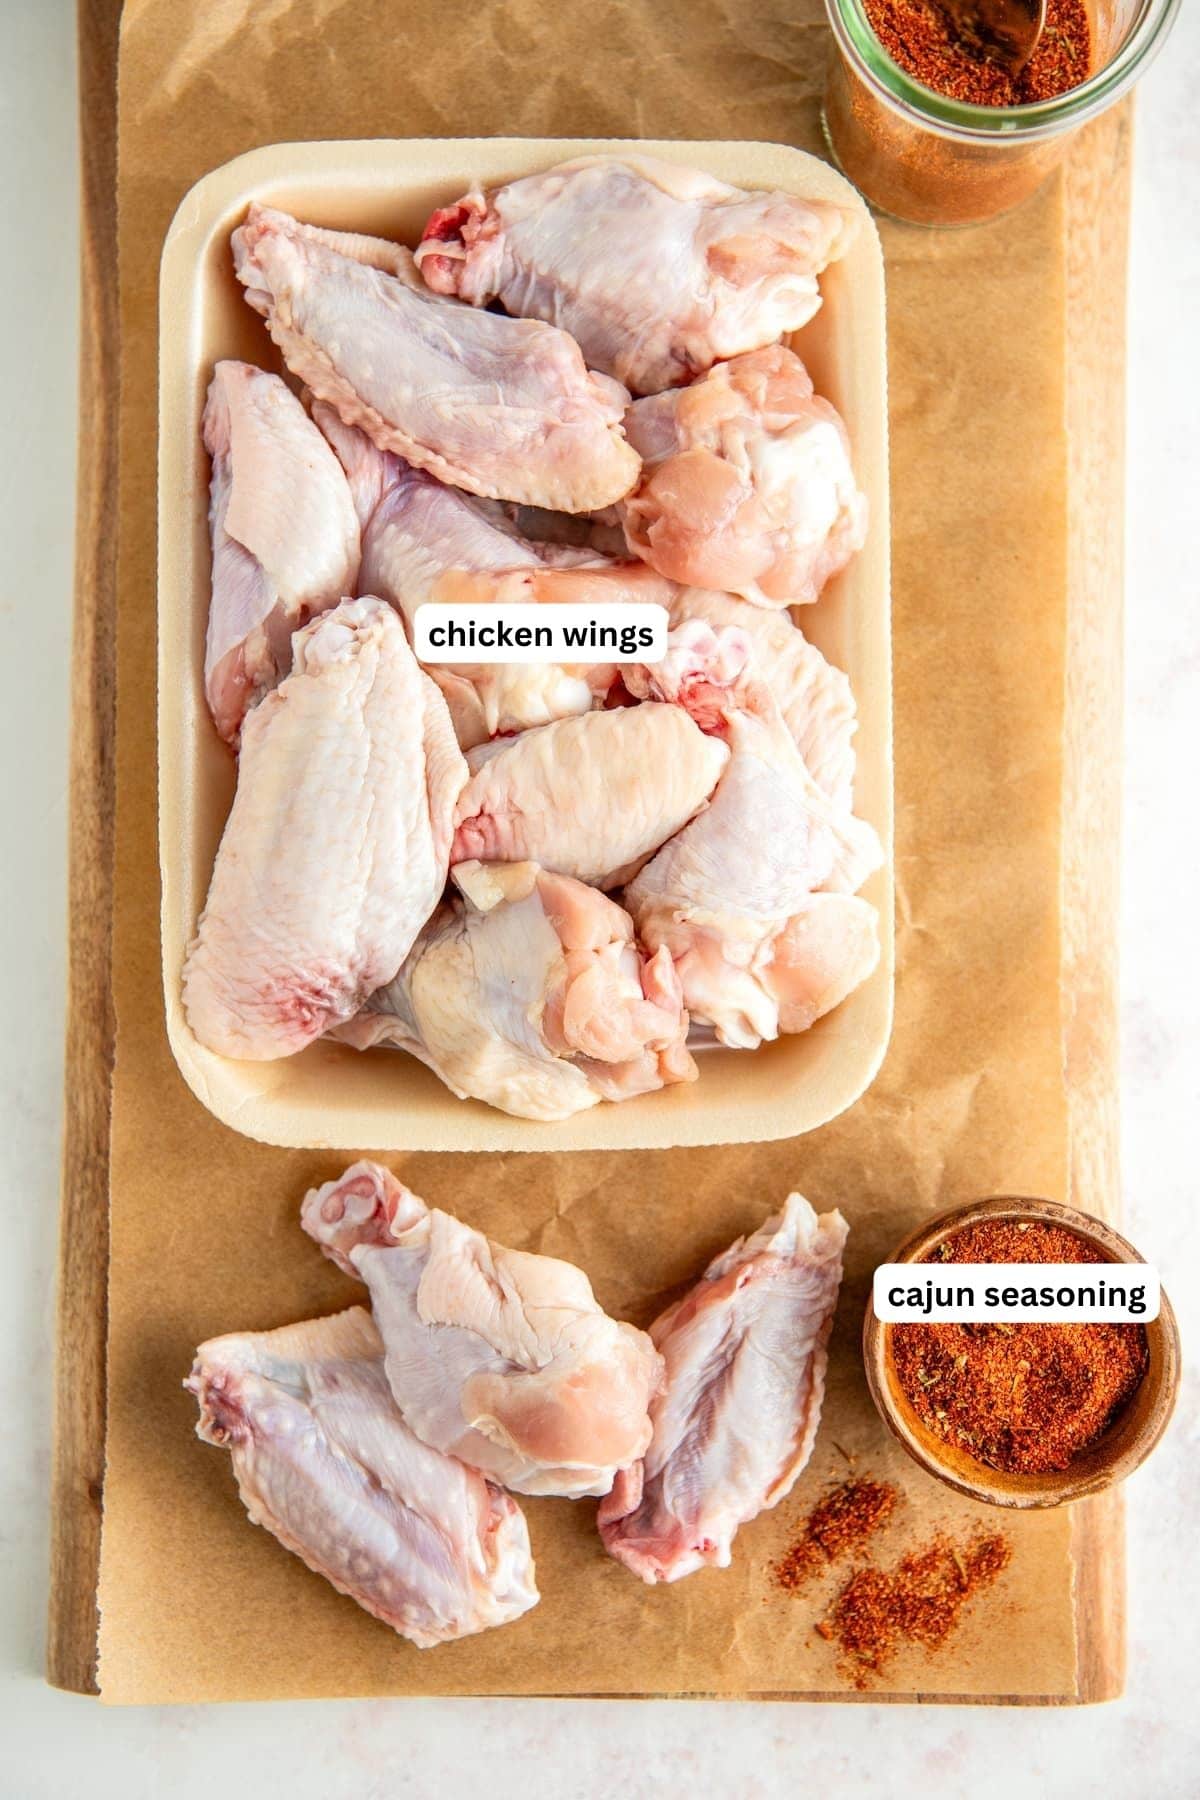 Ingredients for oven baked wings recipe arranged on a cutting board. From top to bottom: raw chicken wings and a bowl of cajun seasoning.